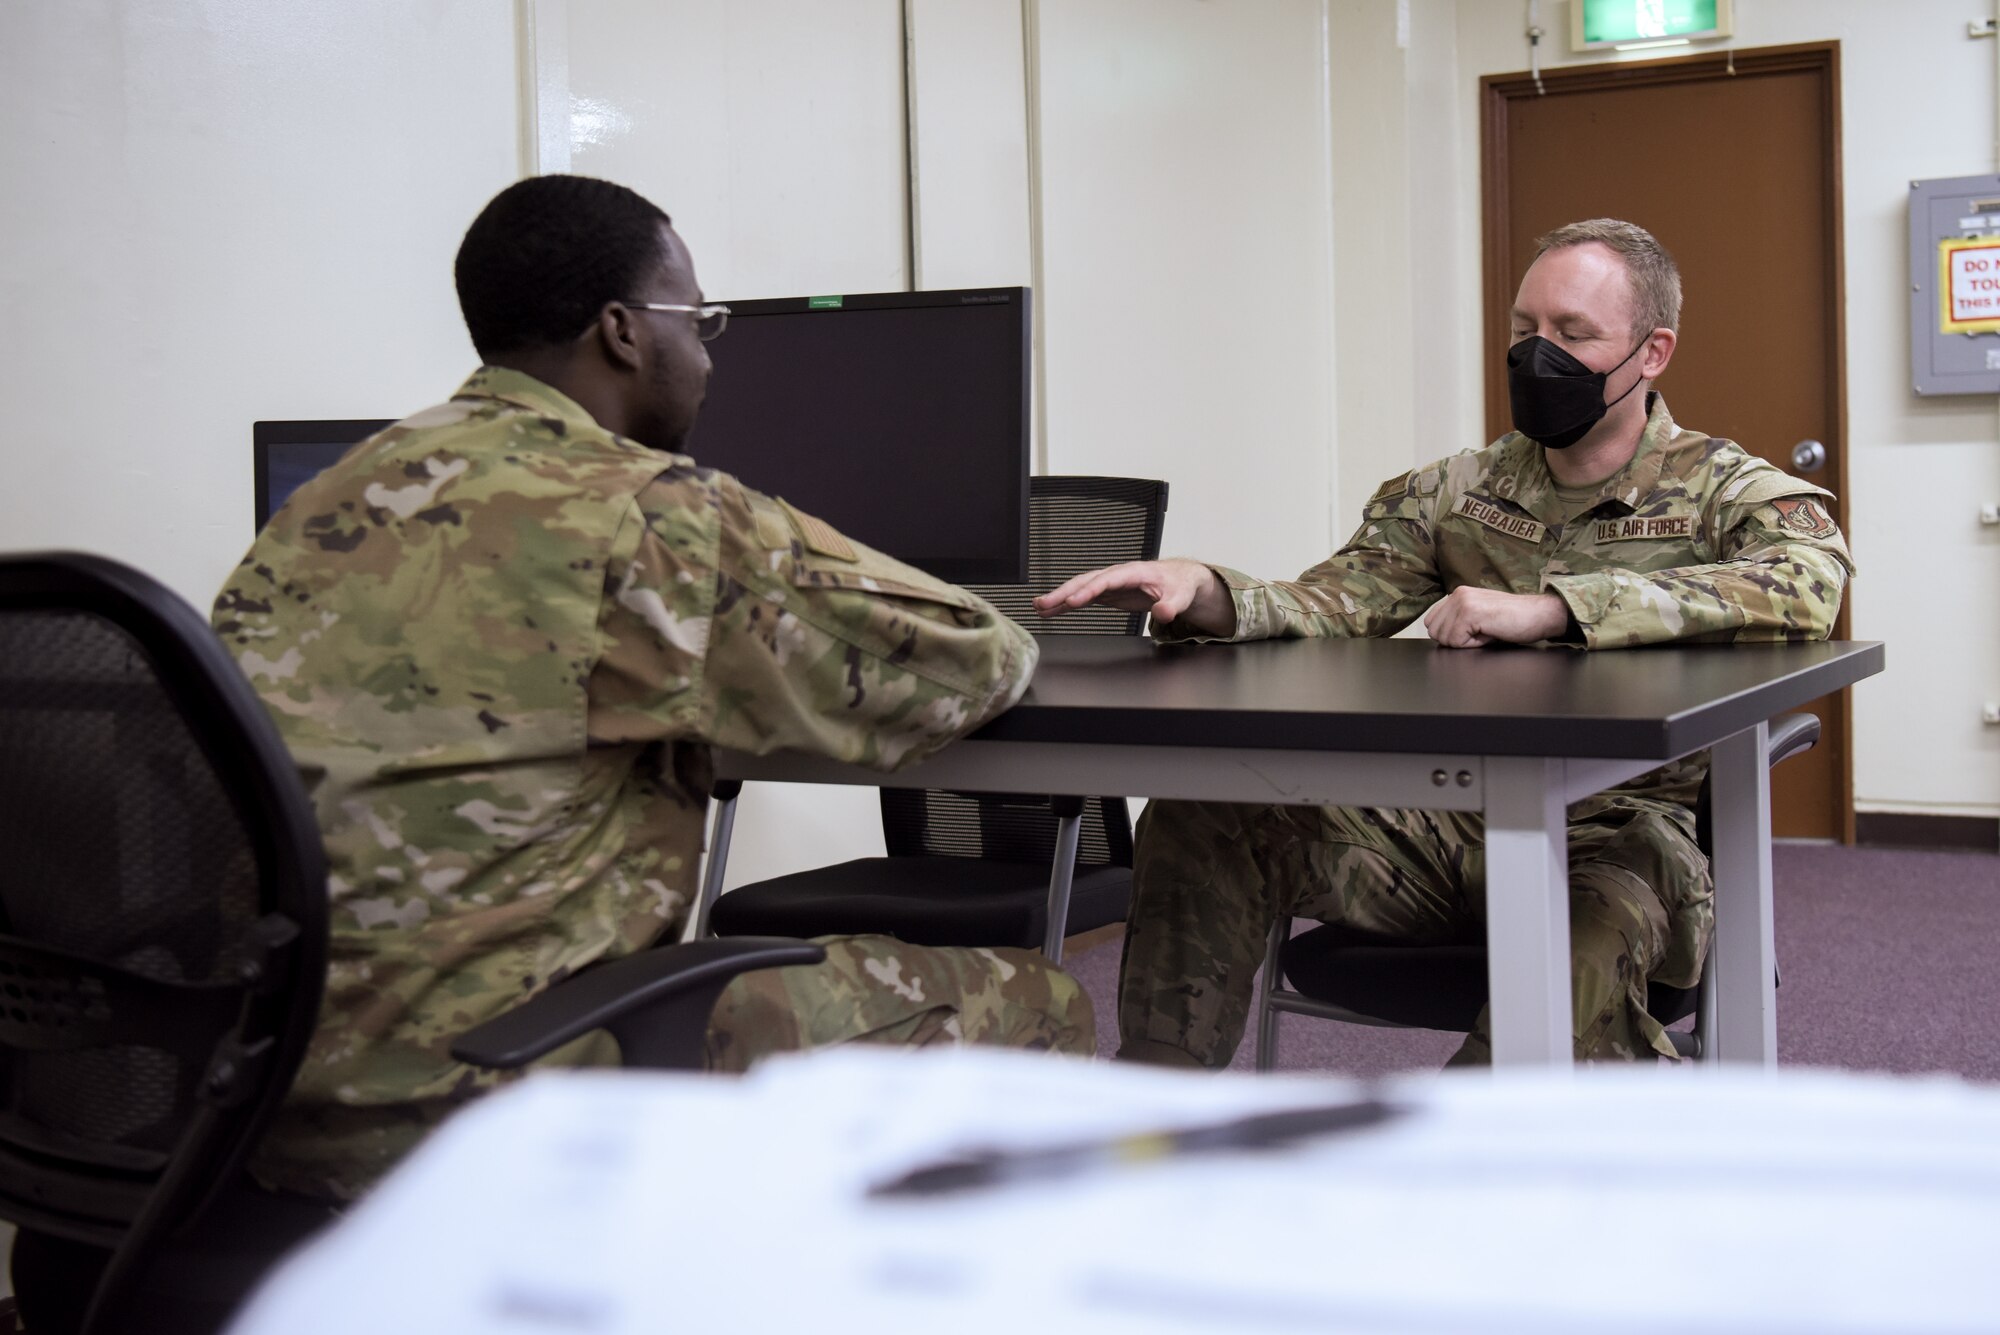 Two Airmen sit at a table talking to each other.